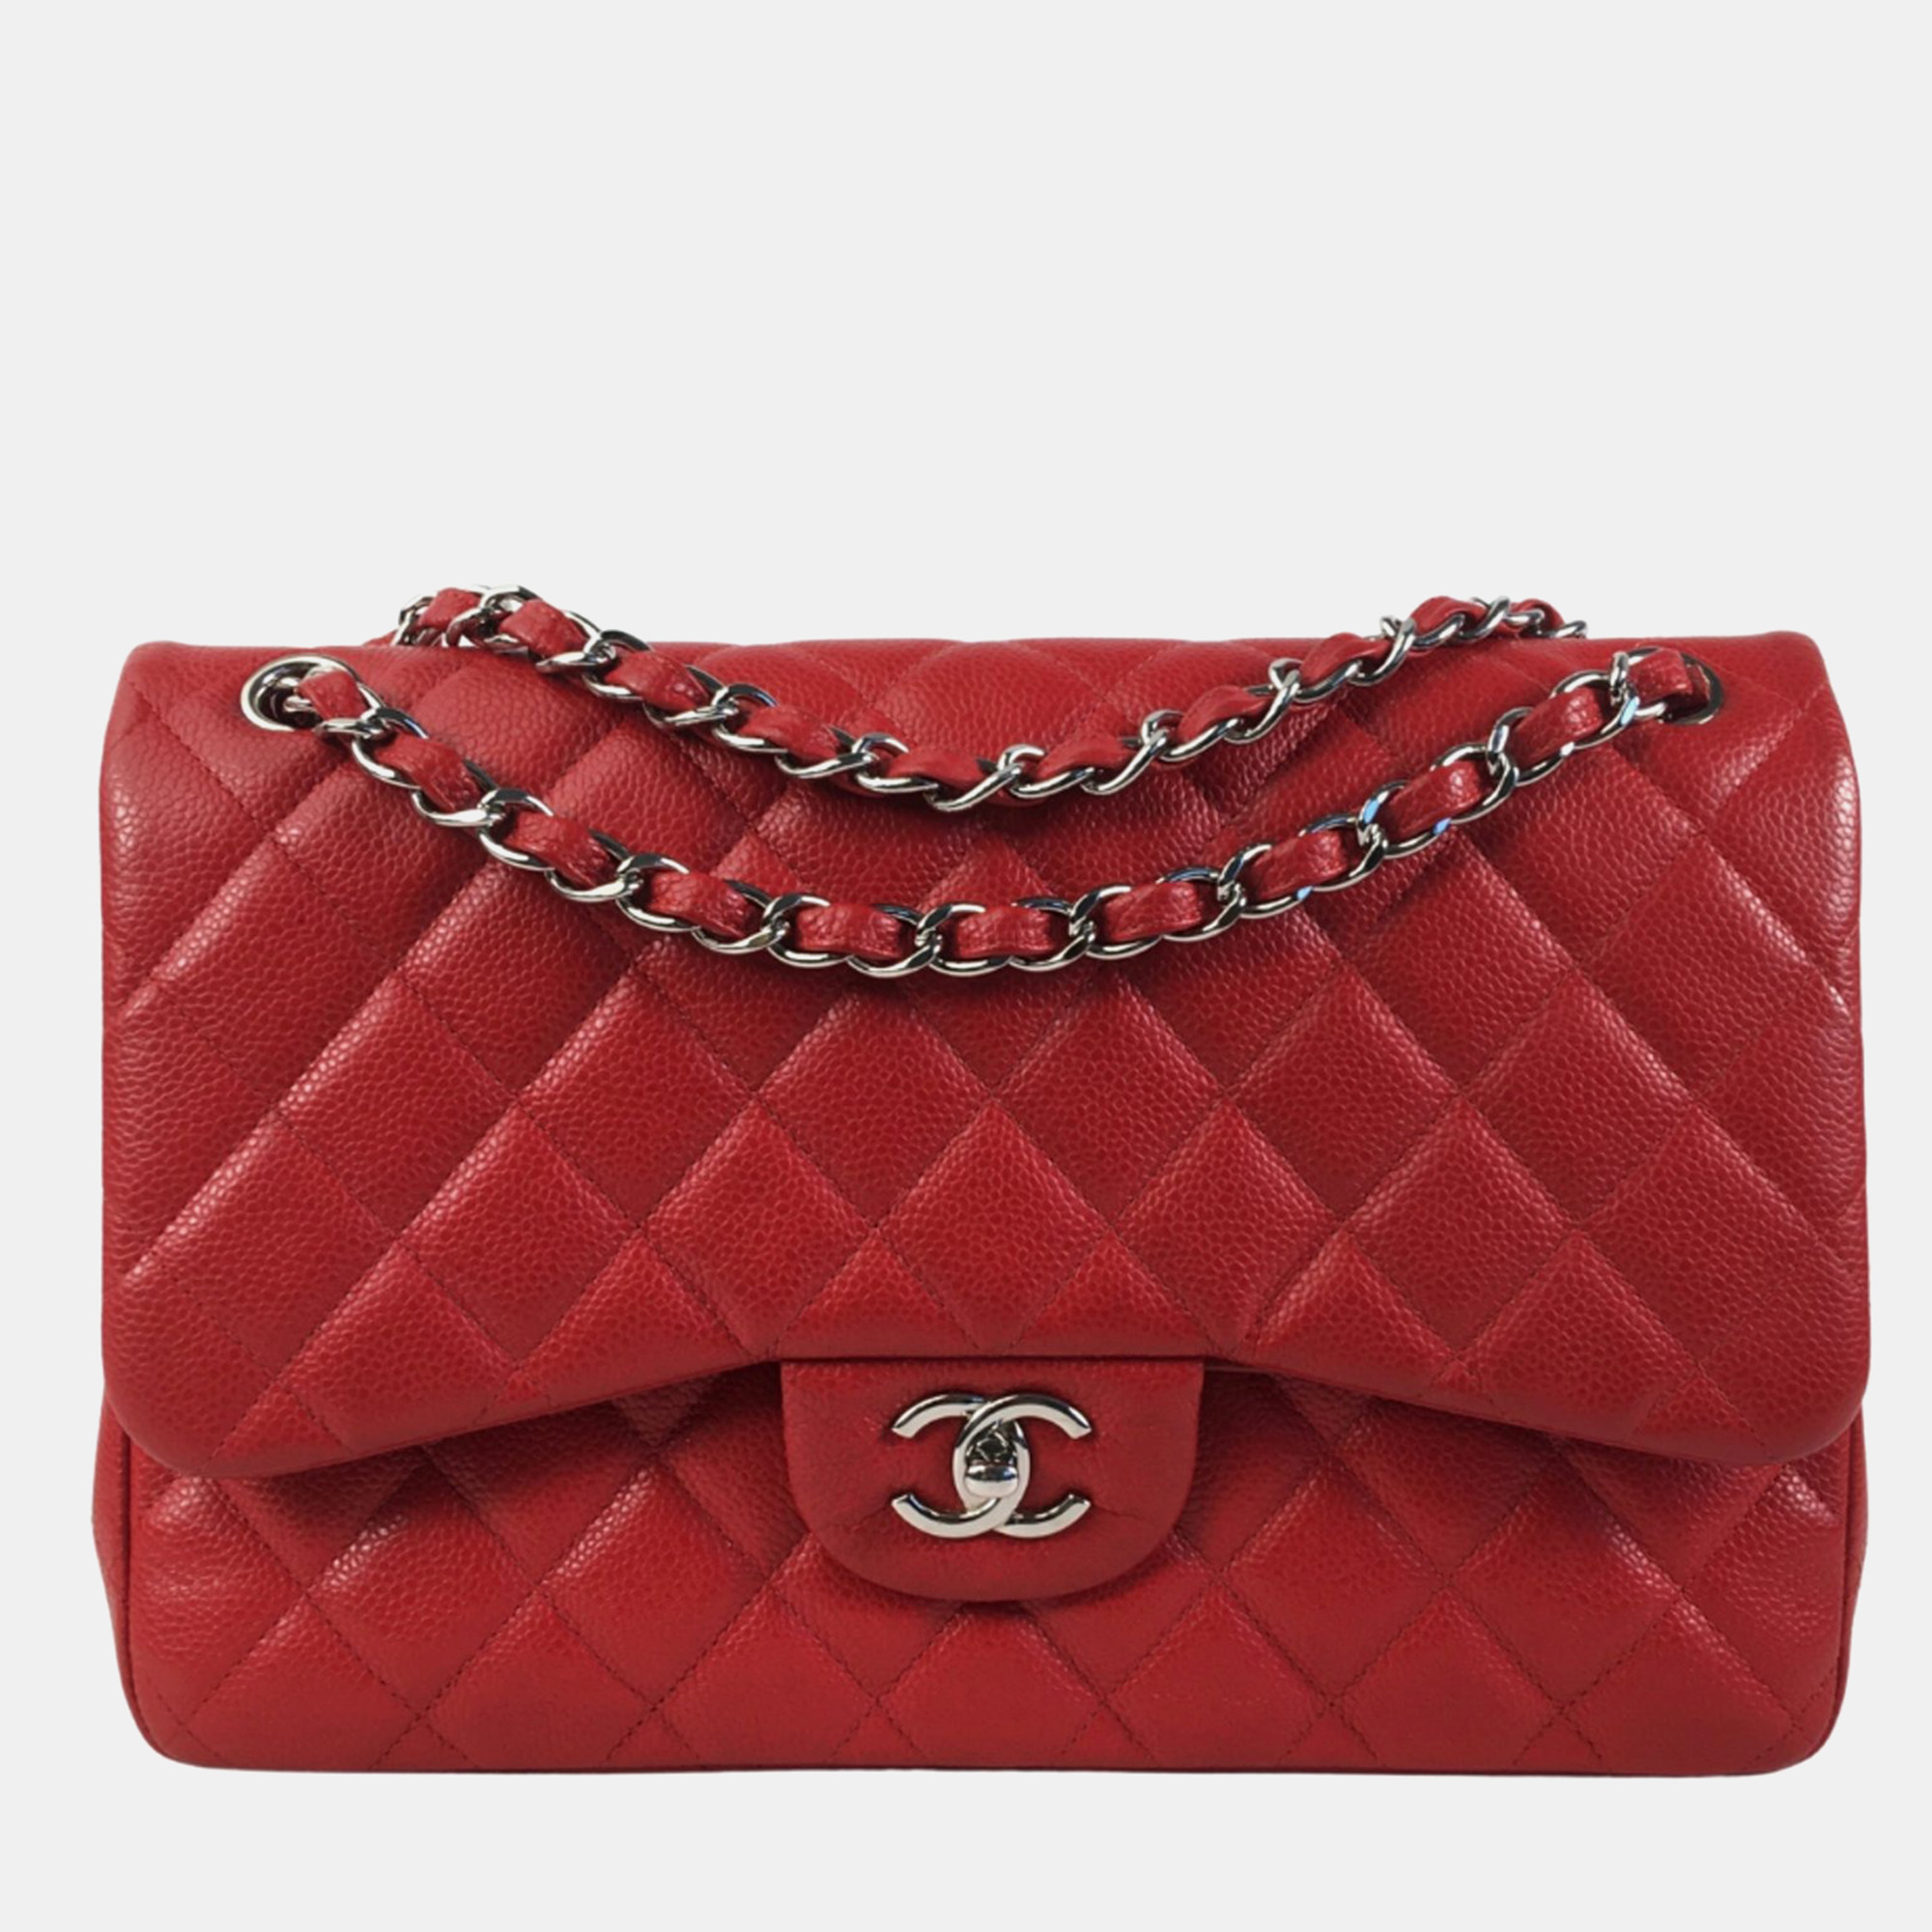 Chanel red caviar leather jumbo classic double flap shoulder bag